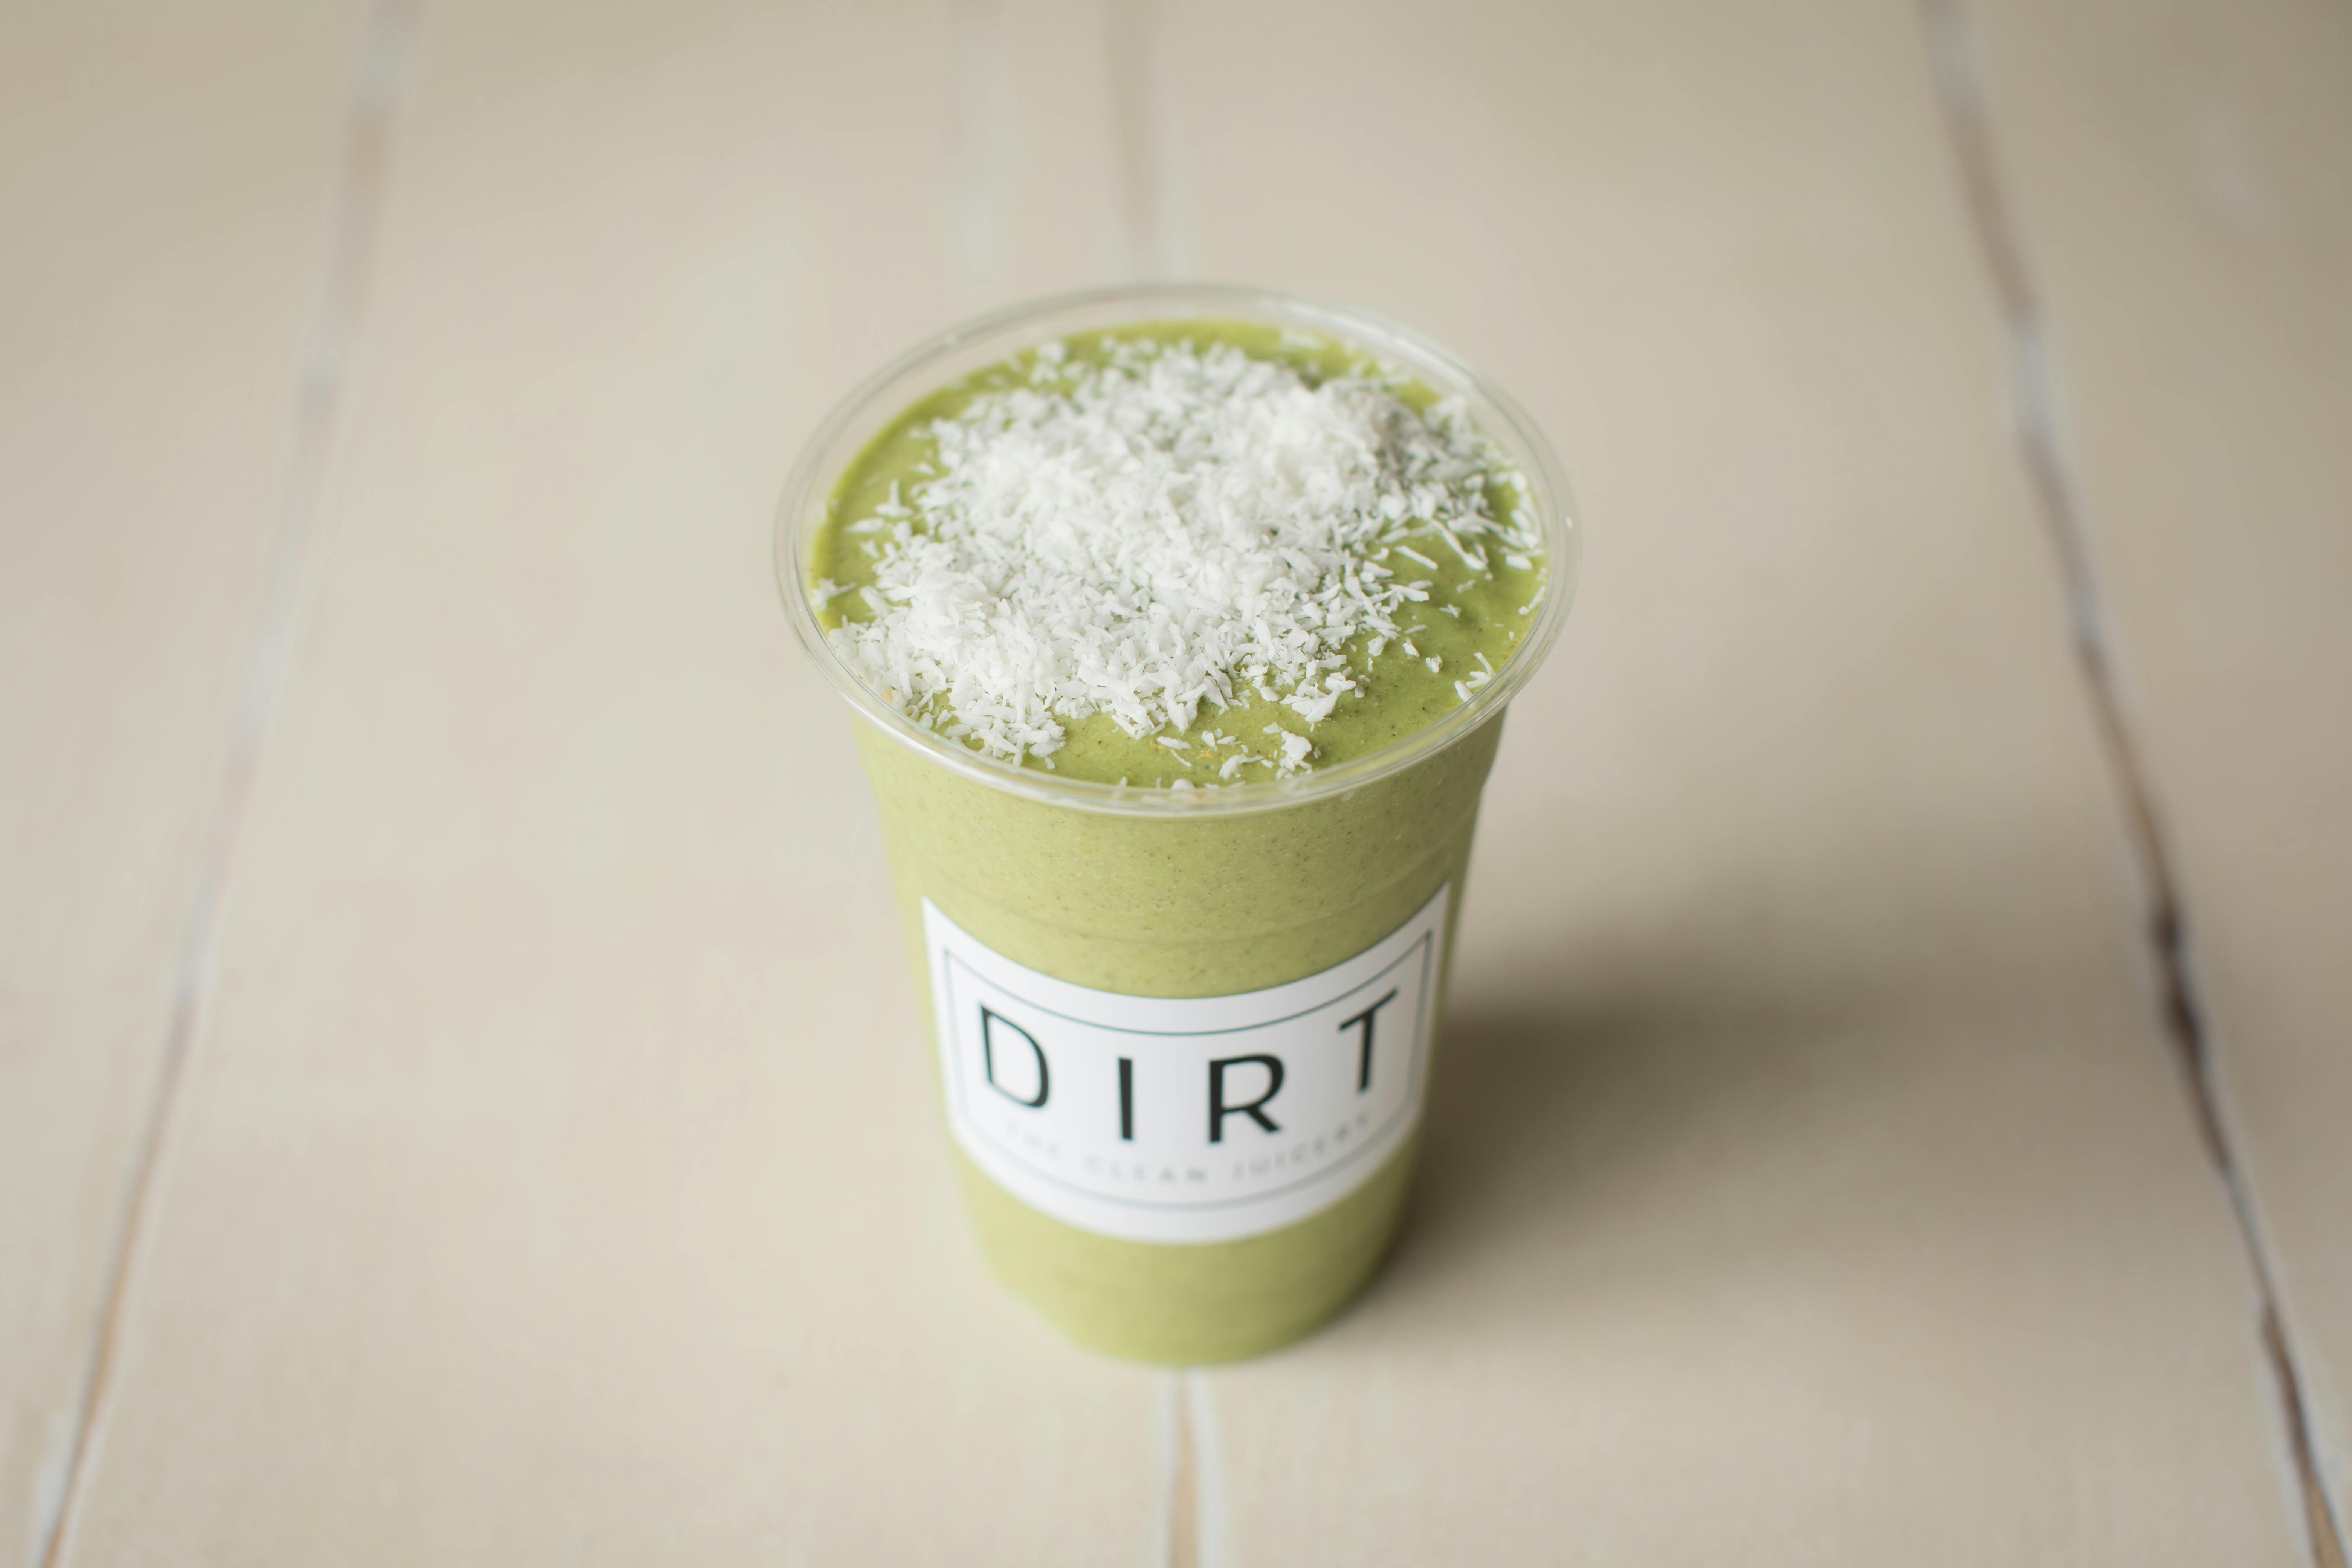 Pina "Kale"ada Smoothie from Dirt Juicery - Bay Park Square in Green Bay, WI